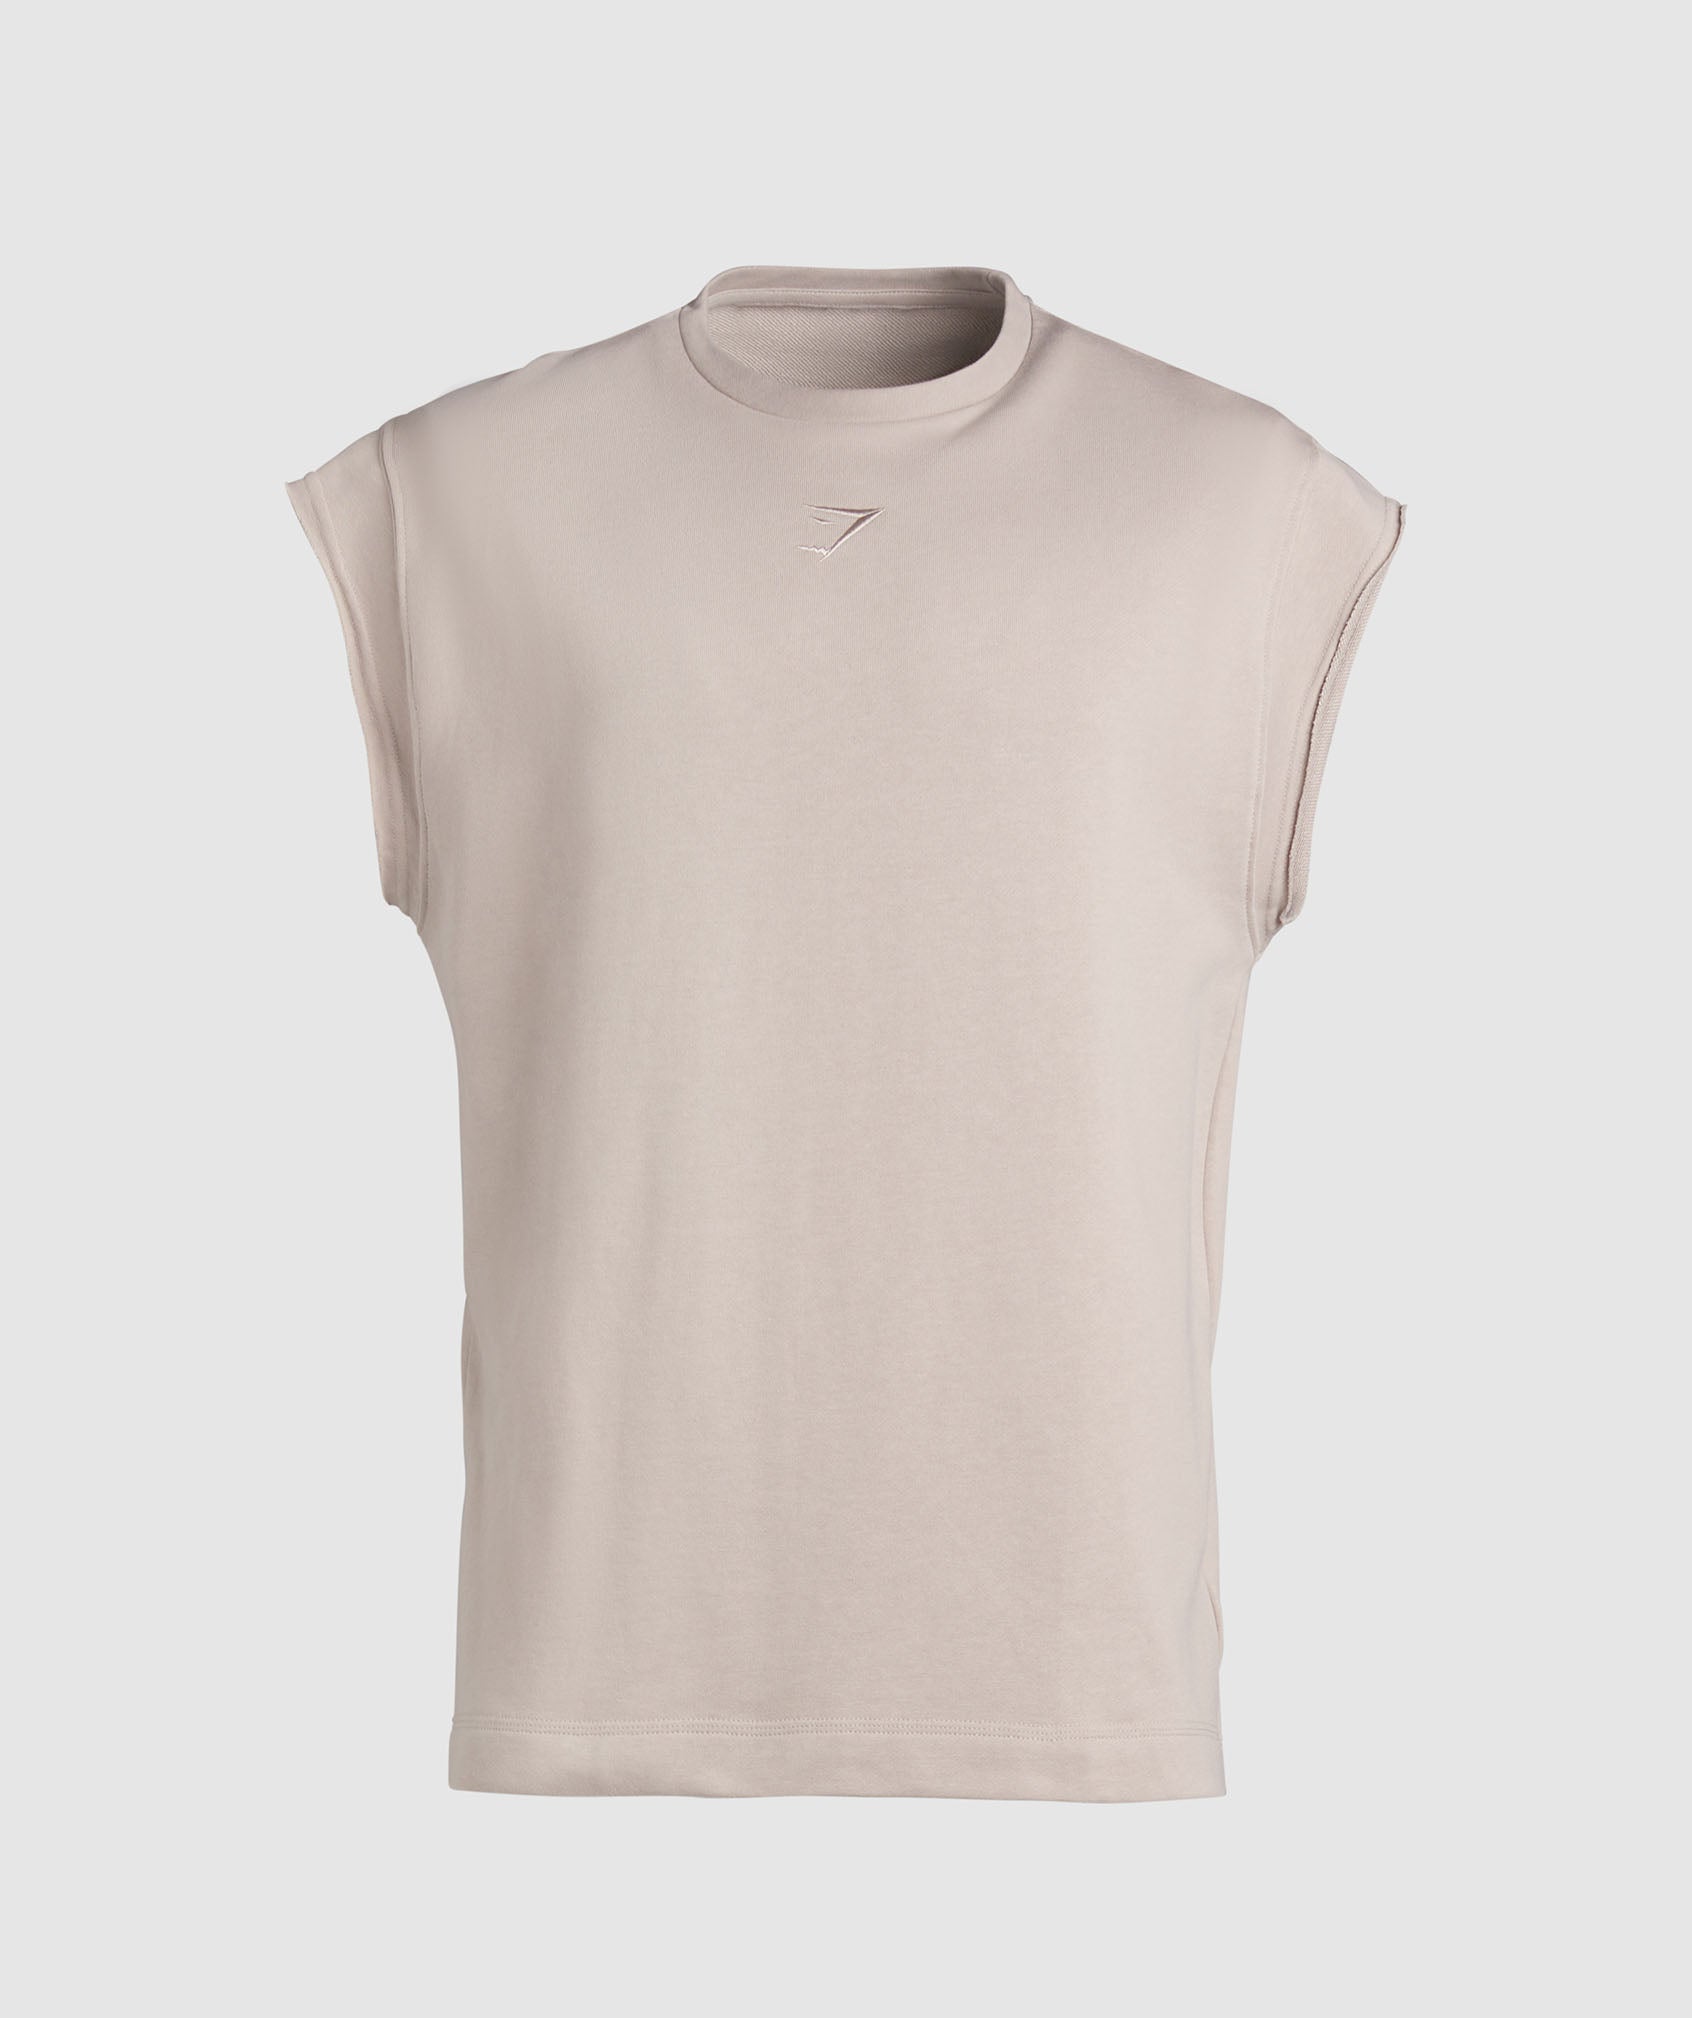 Super Natural Cut Off T-Shirt in Stone Pink - view 7